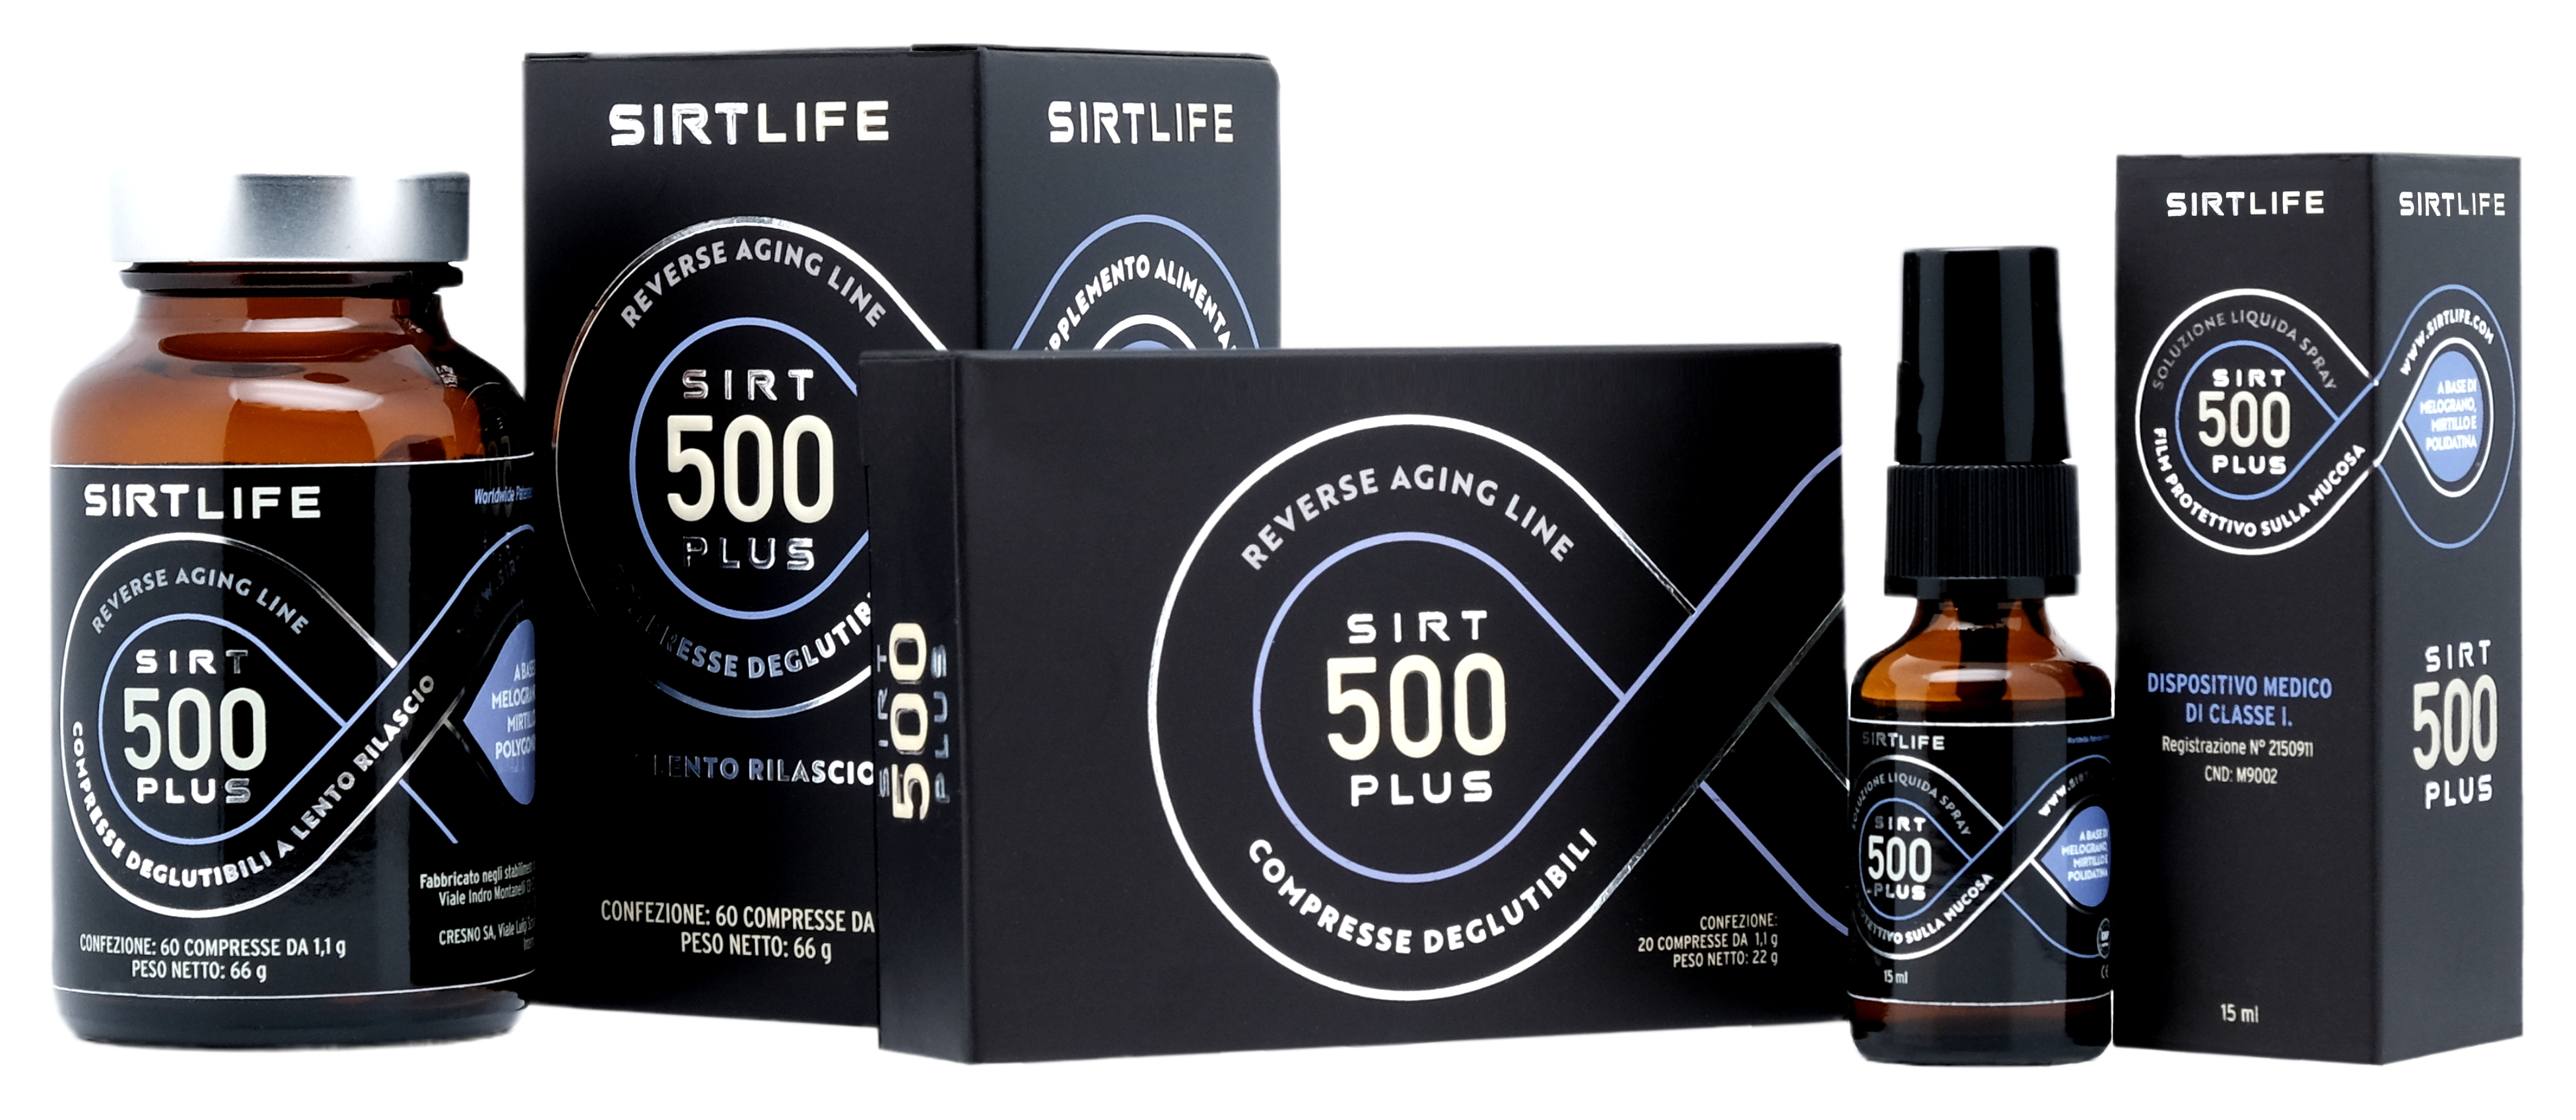 Sirtlife products.